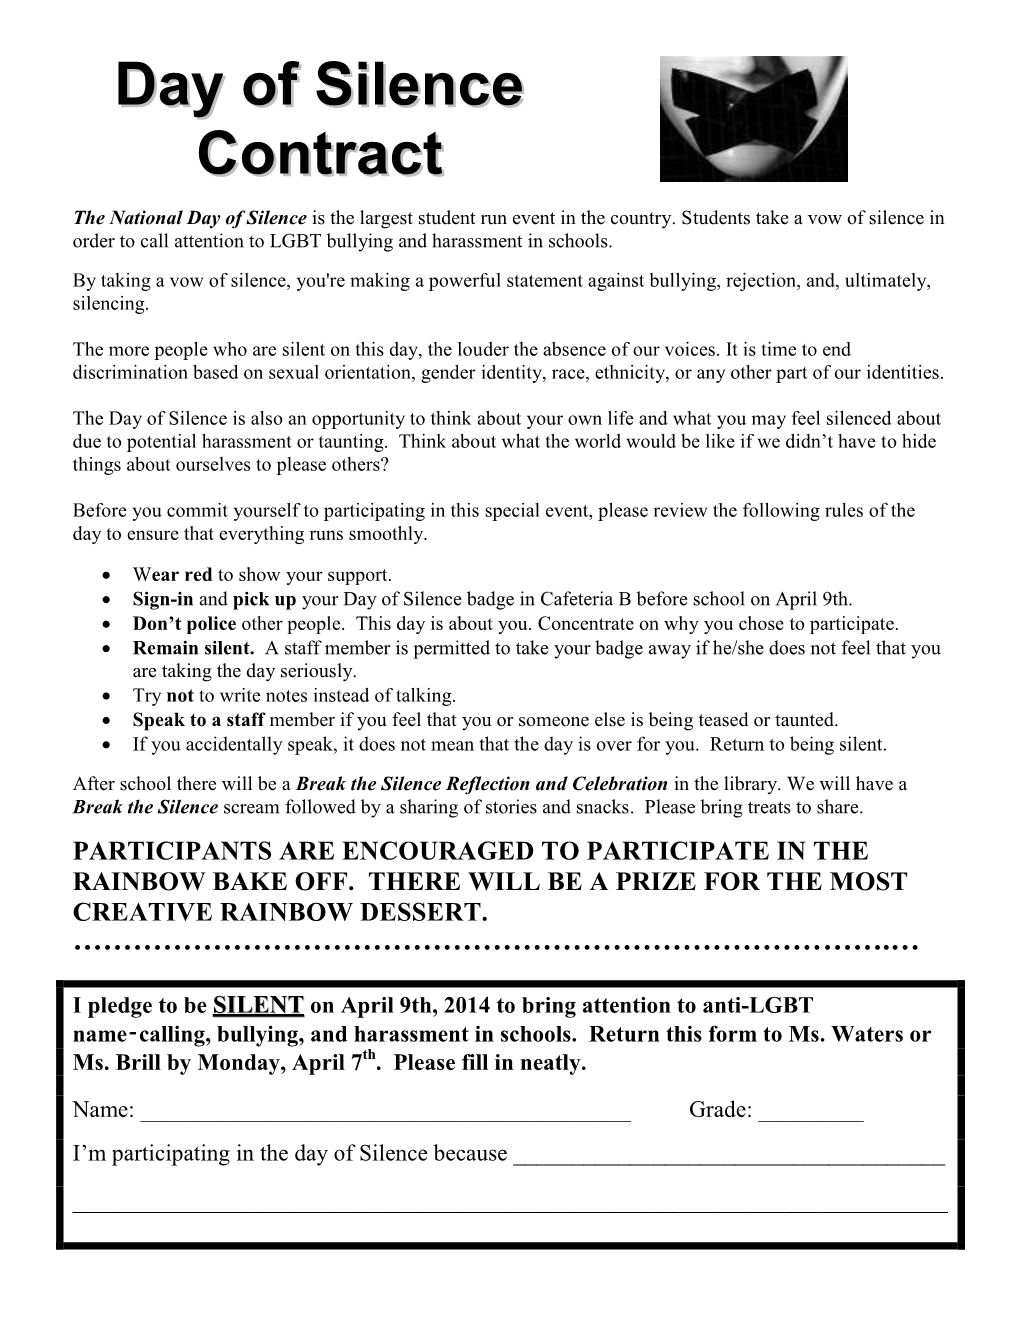 Day of Silence Contract